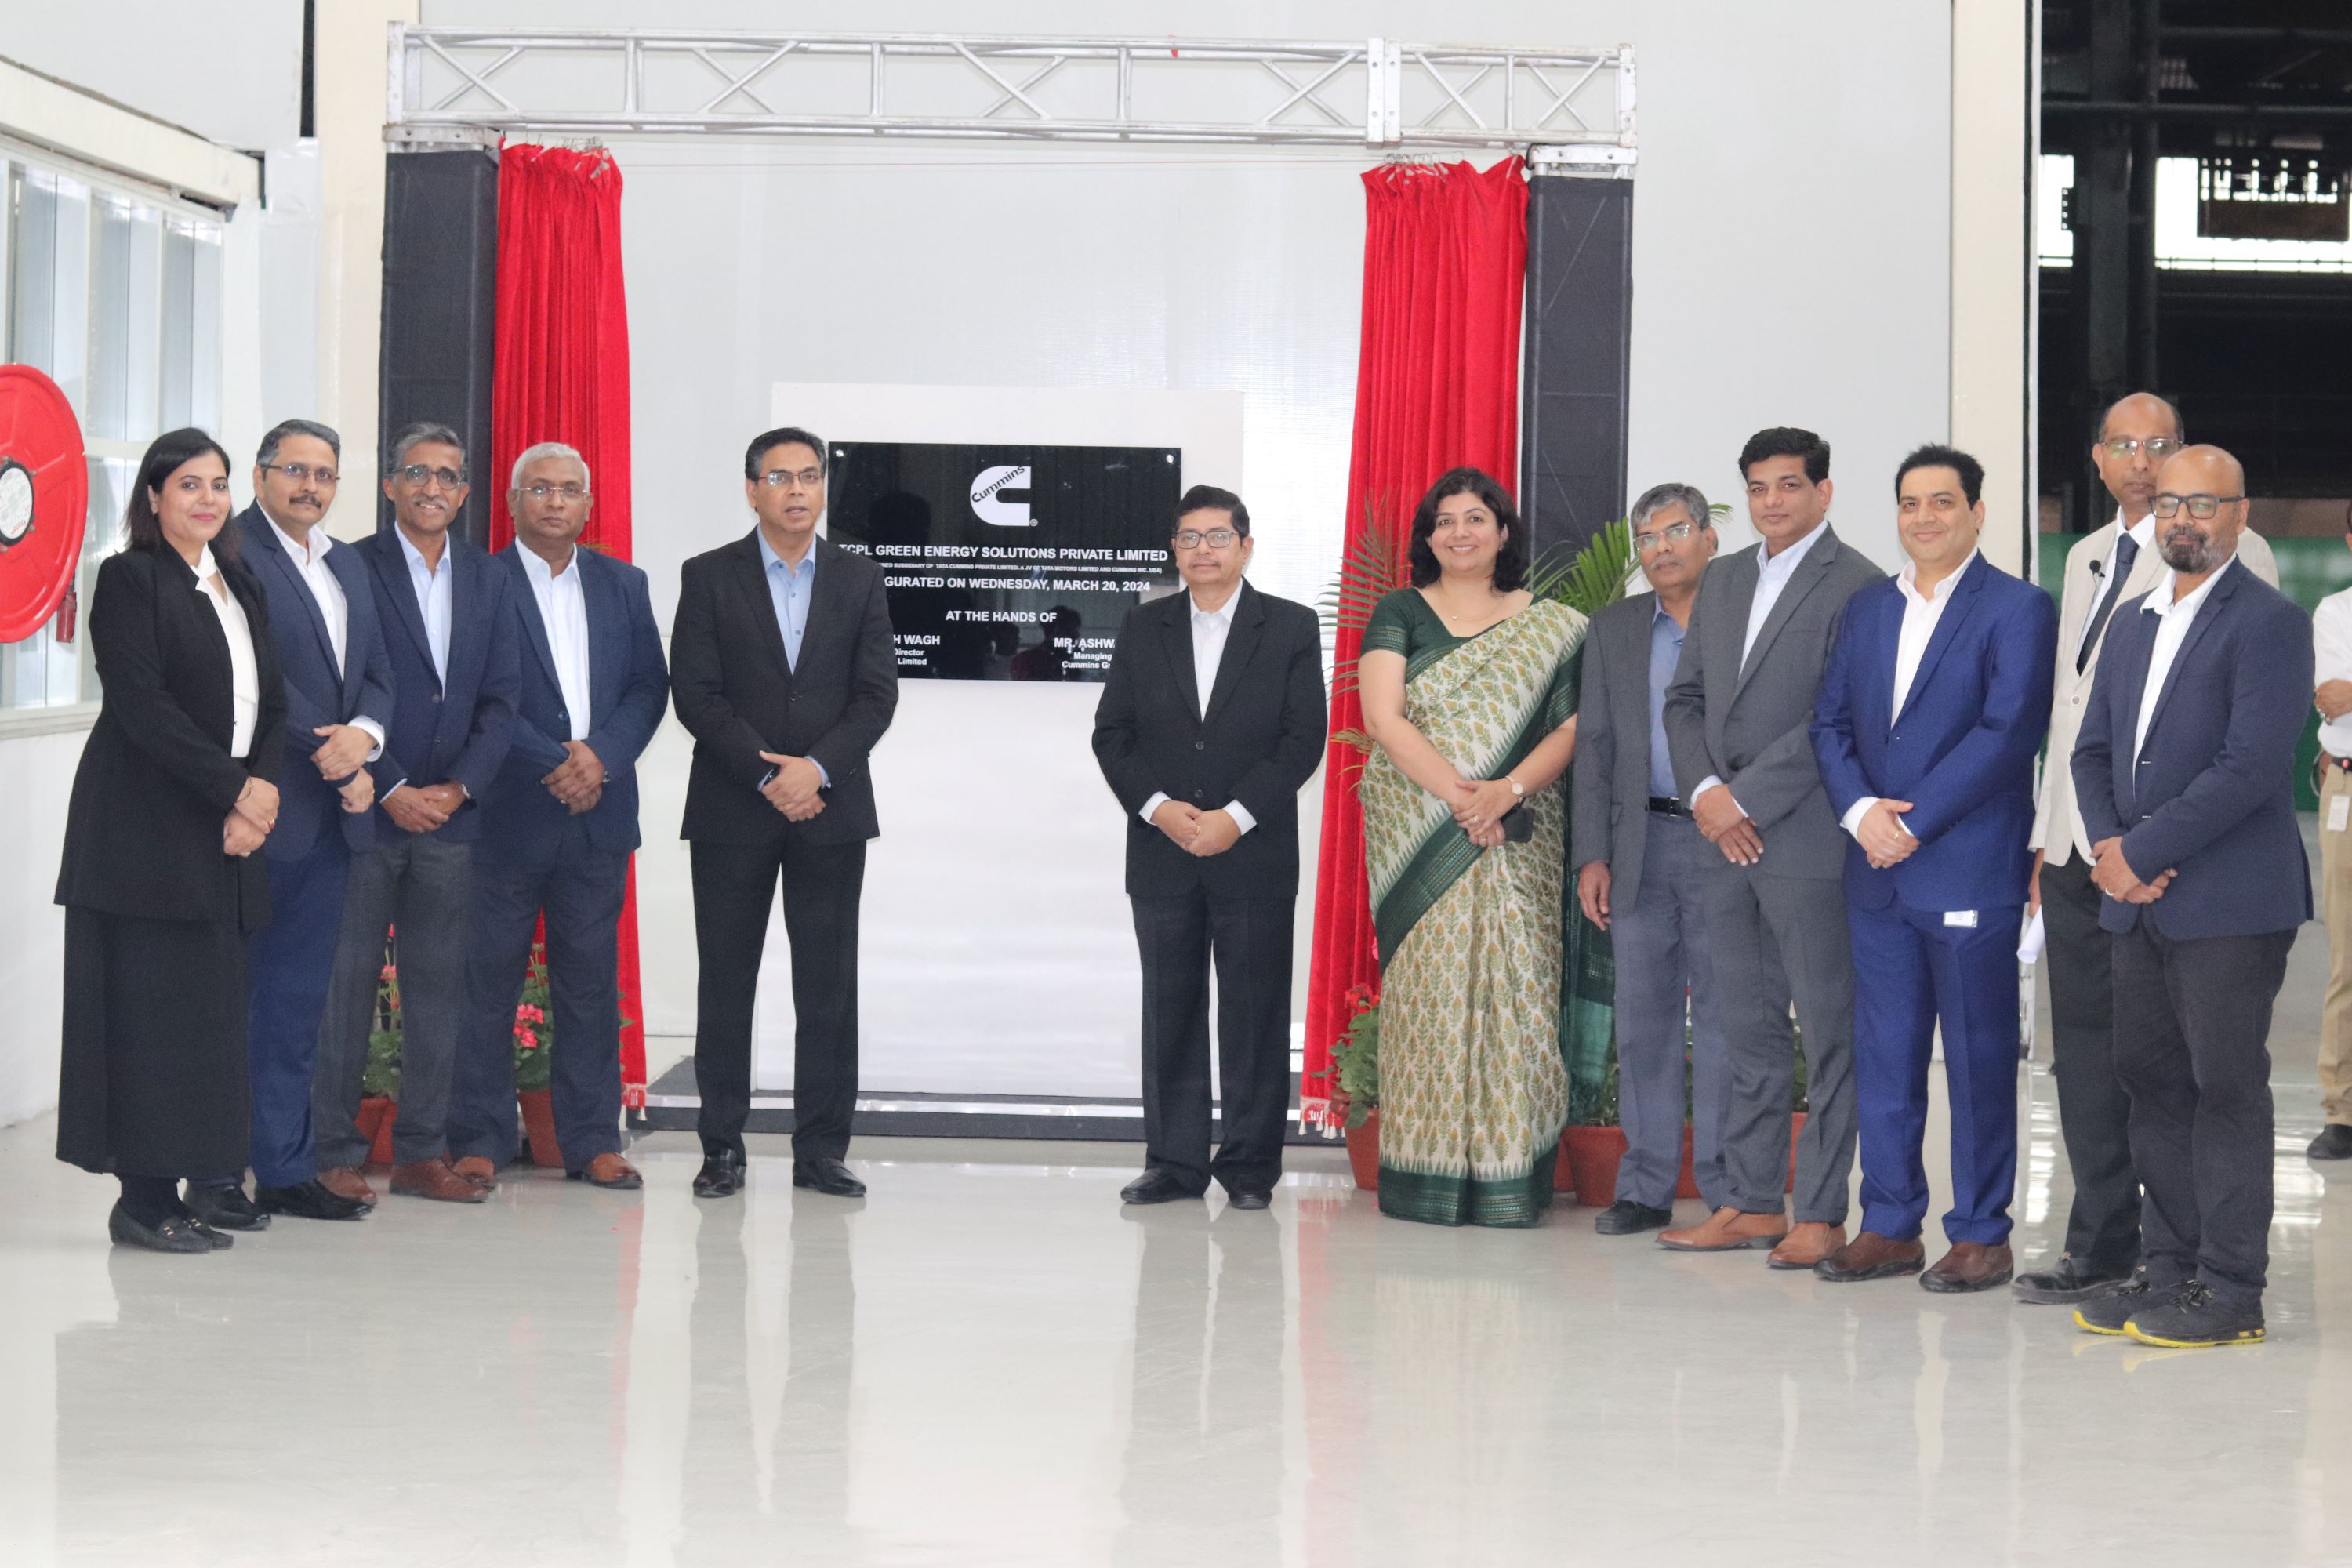 TCPL Green Energy Solutions inaugurates a state-of-the-art manufacturing facility to produce Hydrogen-based Internal Combustion Engines